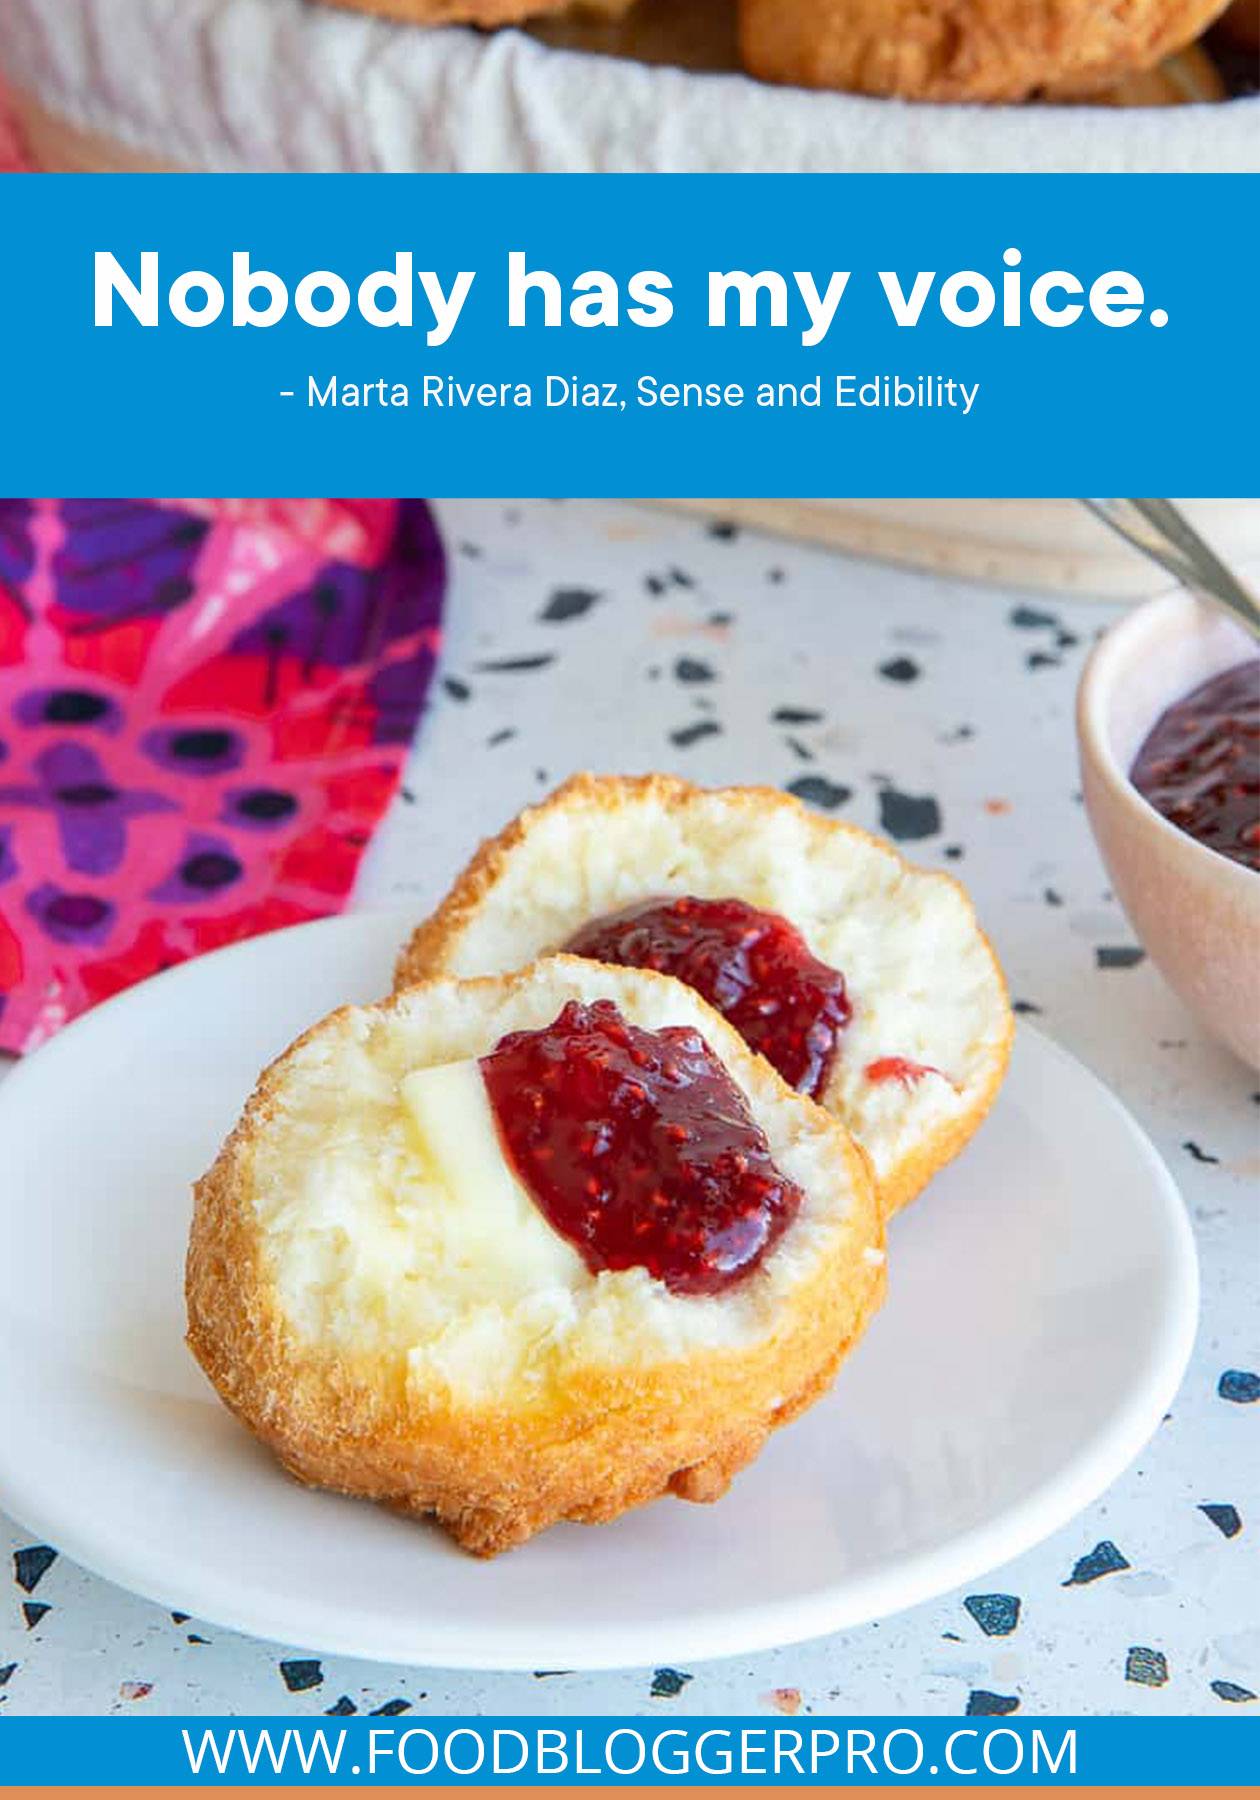 A photograph of raspberry cookies with a quote from Marta Rivera Diaz's episode of The Food Blogger Pro Podcast that reads "Nobody has my voice."